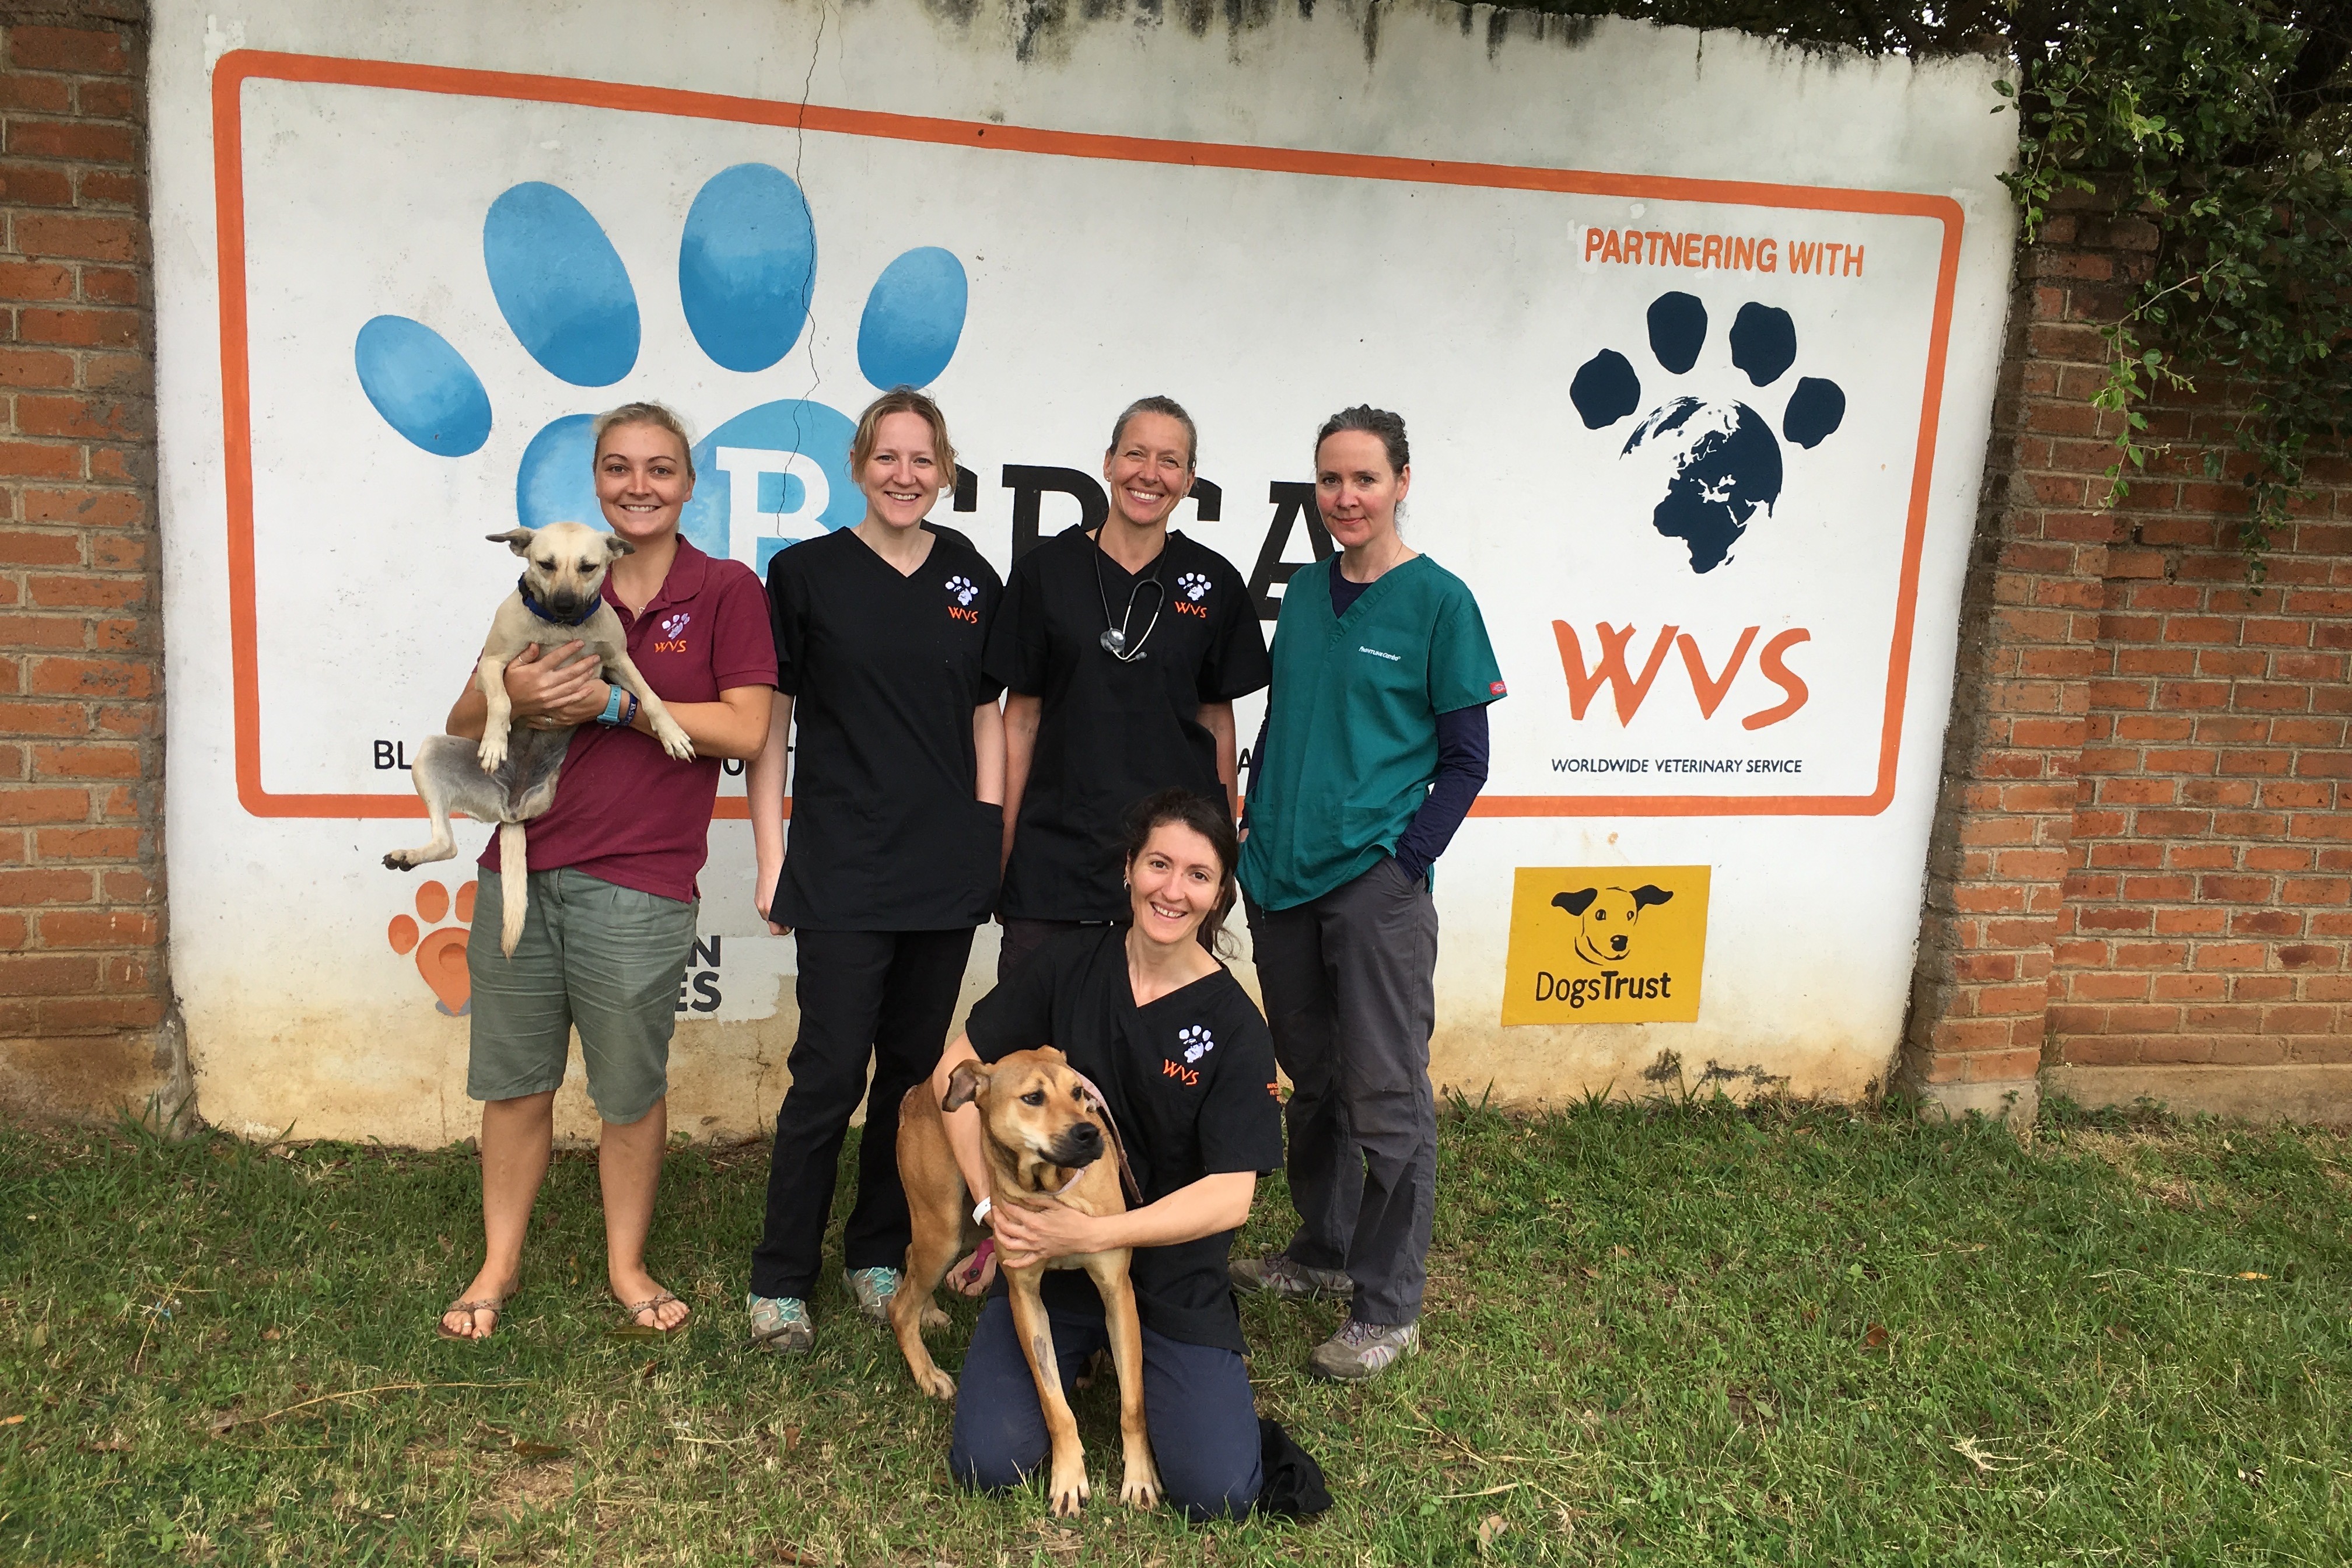 Vet Practice Members: Helping animals beyond the clinic